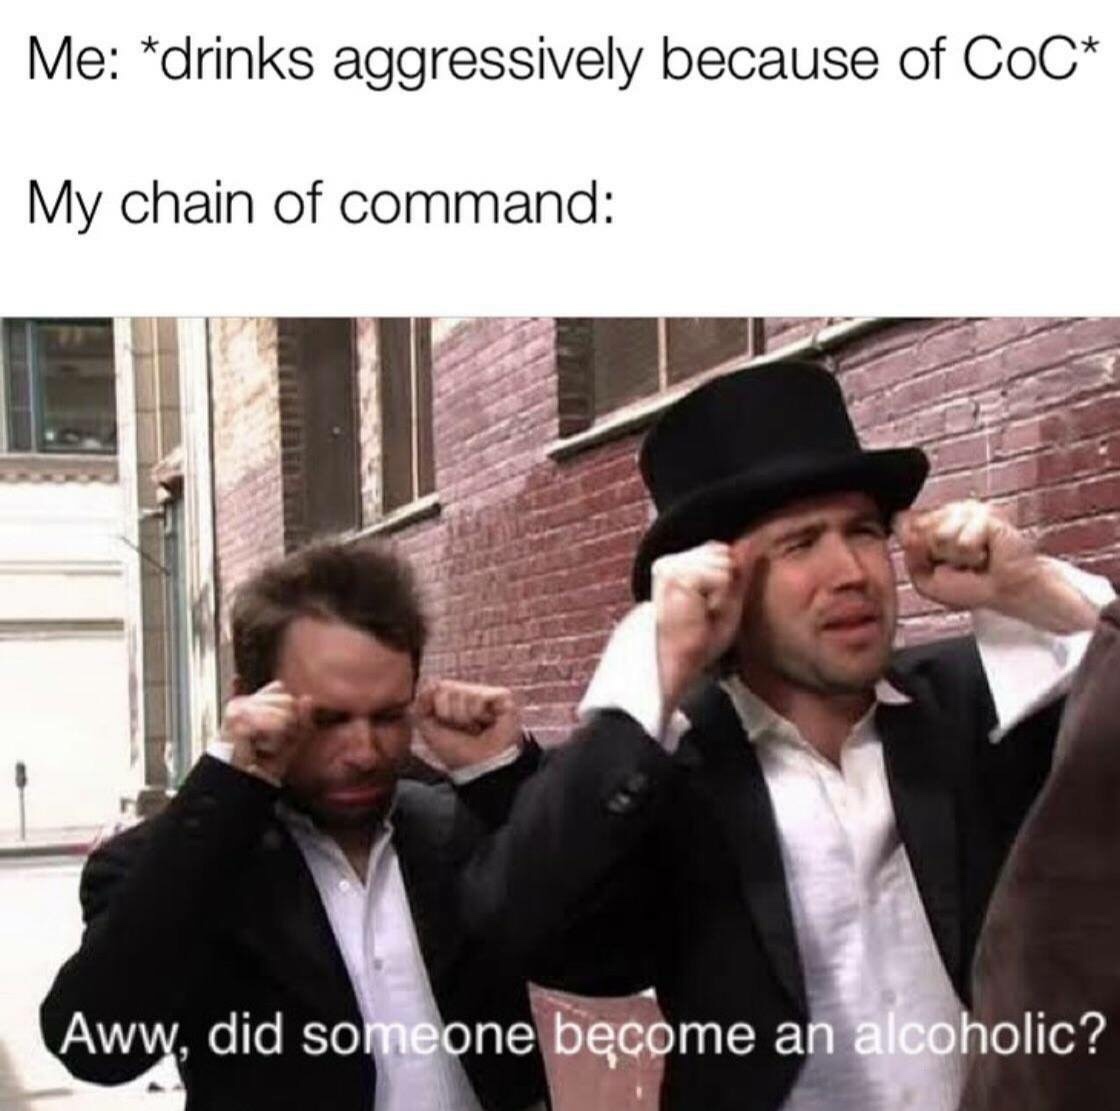 always sunny did someone get addicted - Me drinks aggressively because of CoC My chain of command Aww, did someone become an alcoholic?